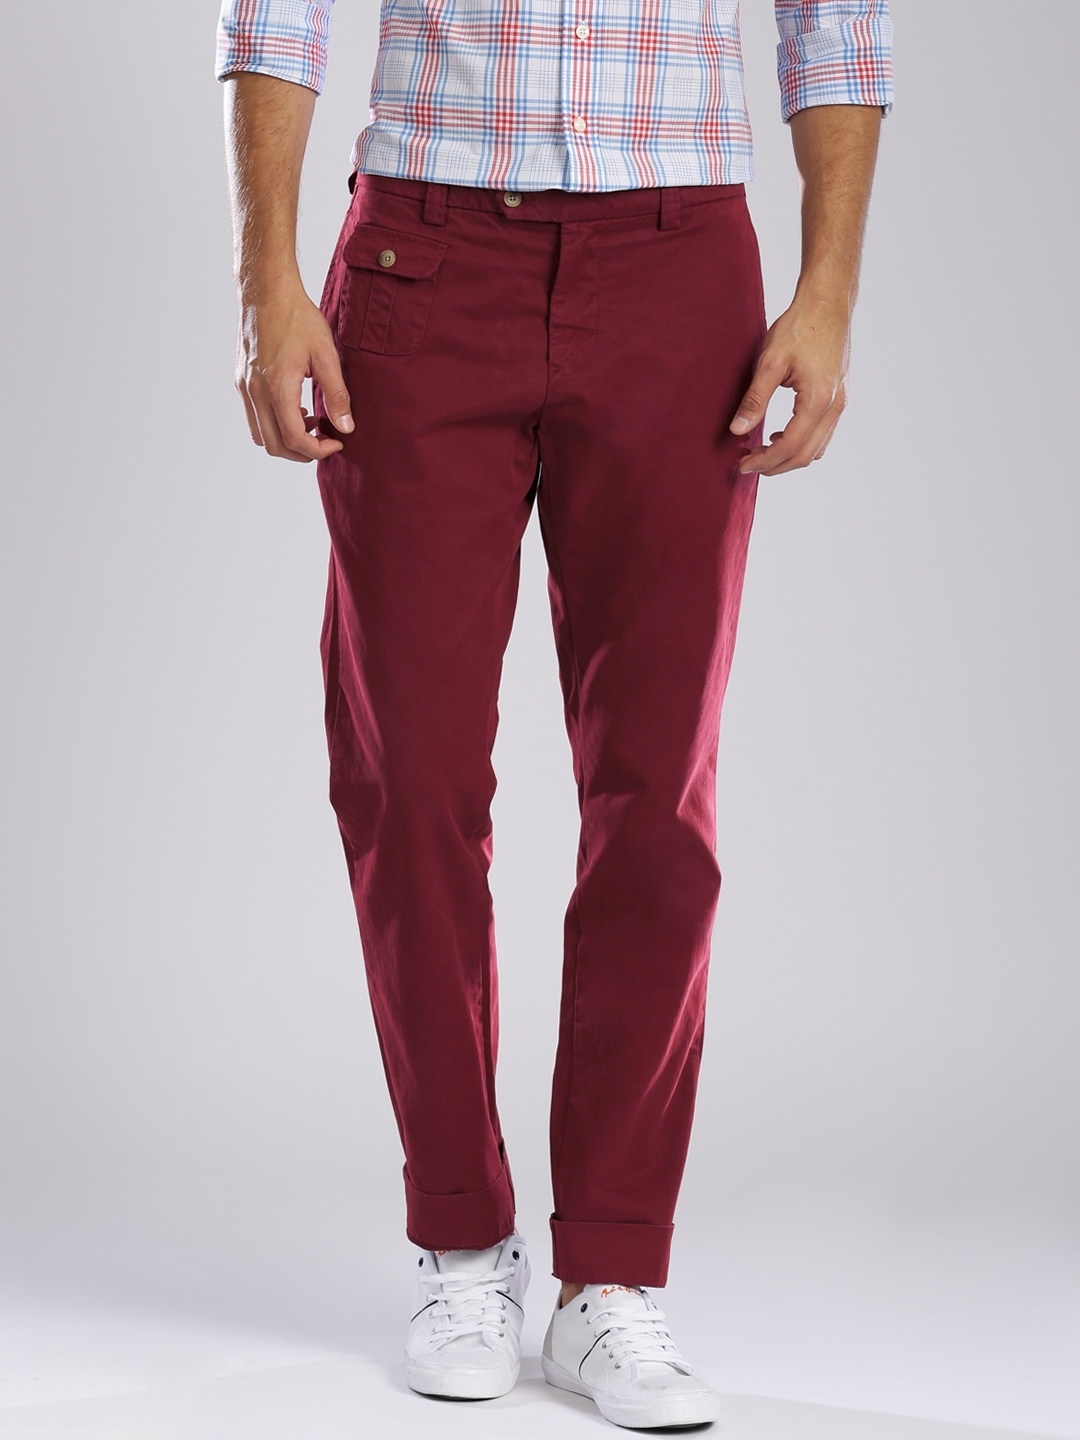 Buy GANT Maroon Army Pocket Chino Trousers  Trousers for Men 1312064   Myntra